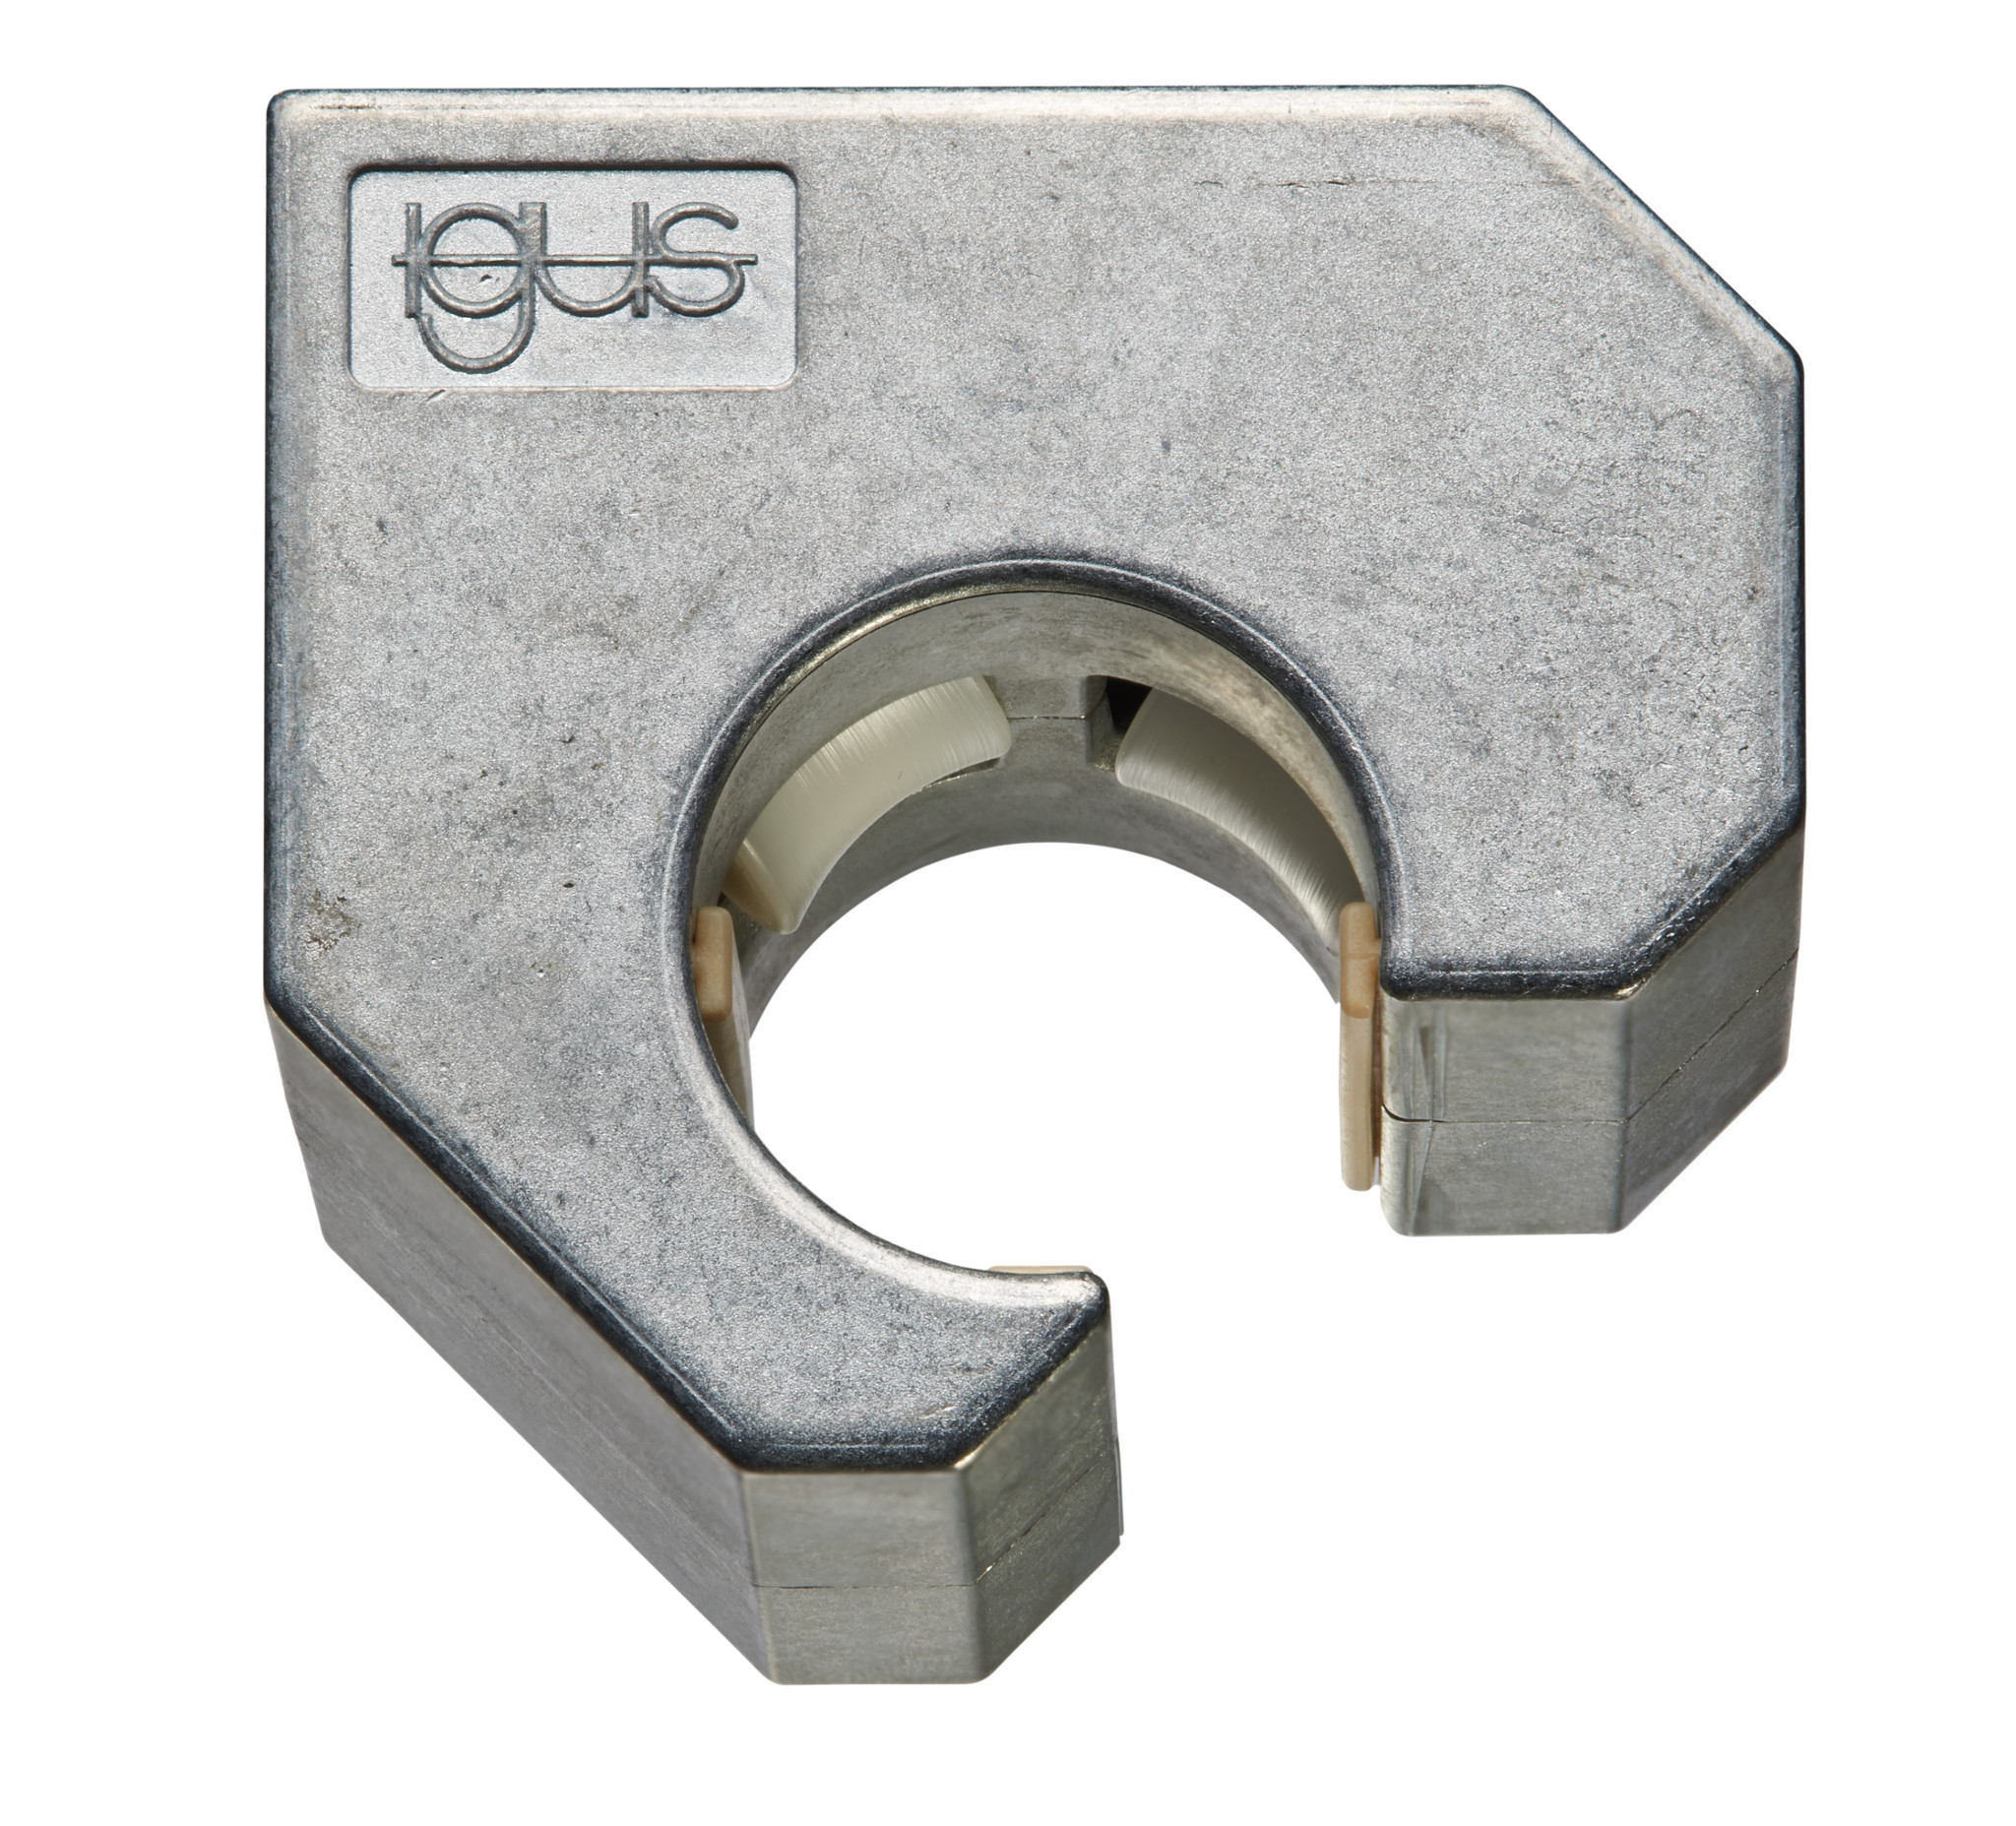 igus® roller bearings with sliding elements – lubrication-free